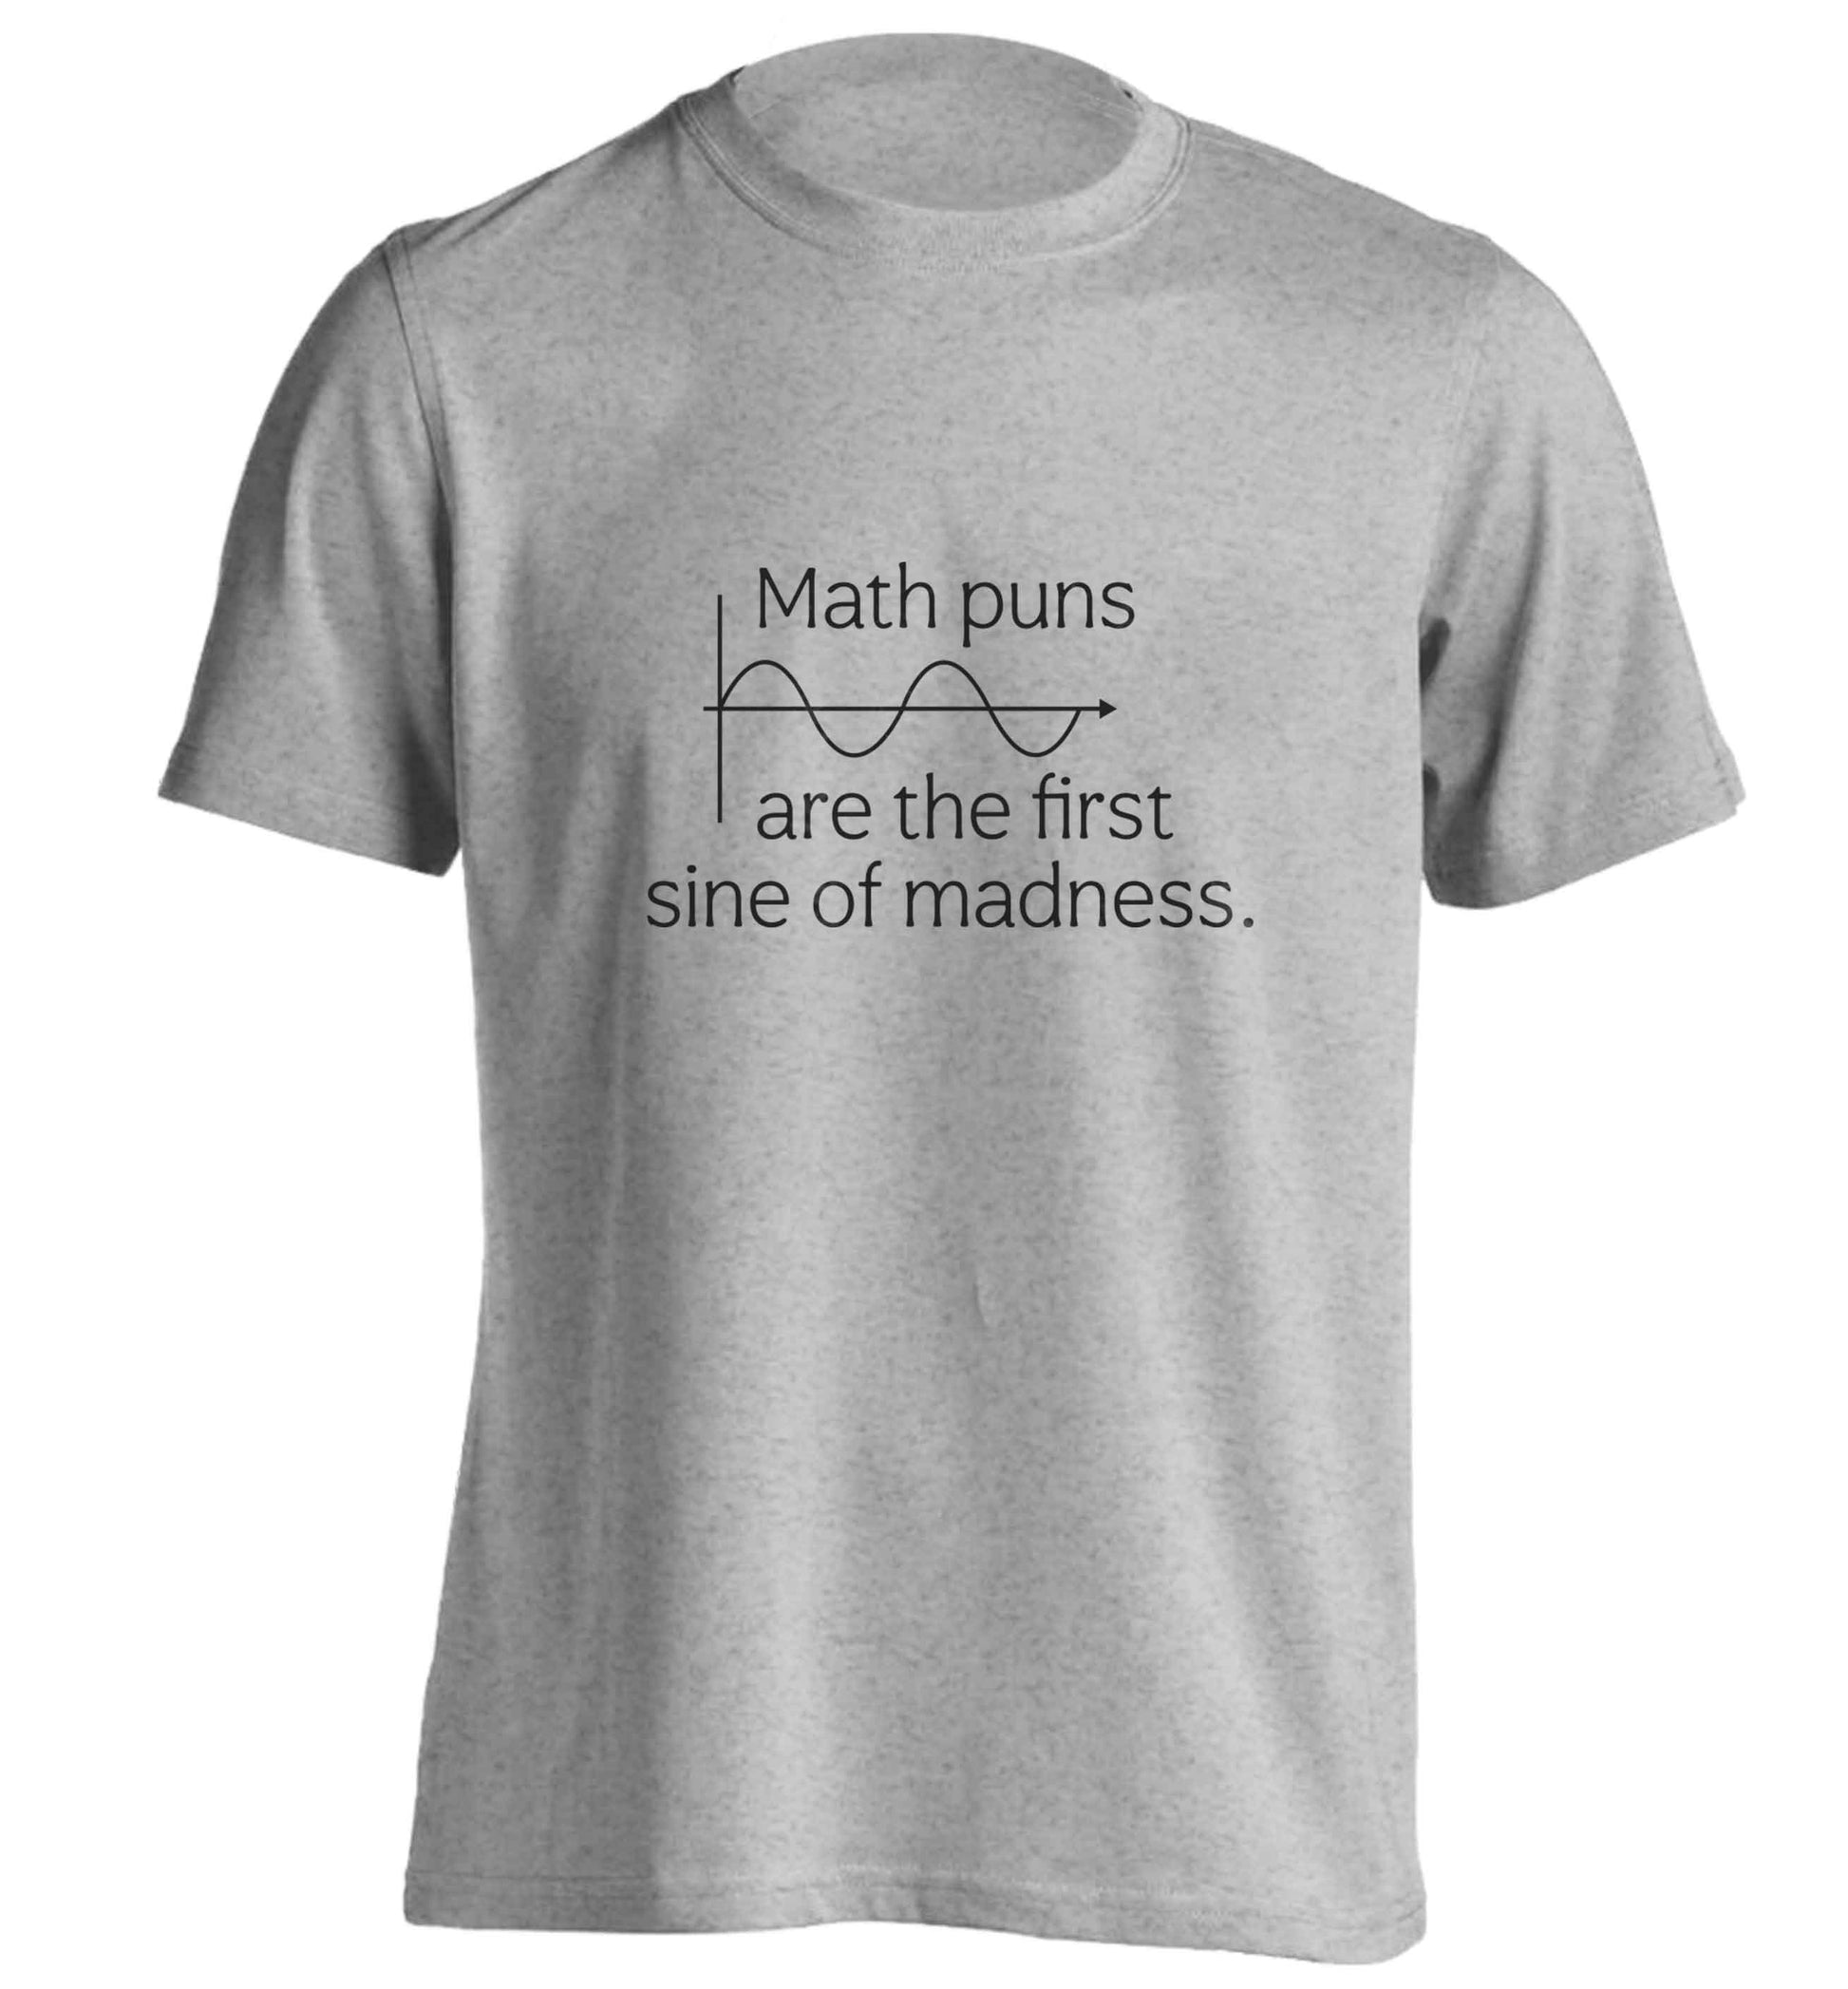 Math puns are the first sine of madness adults unisex grey Tshirt 2XL